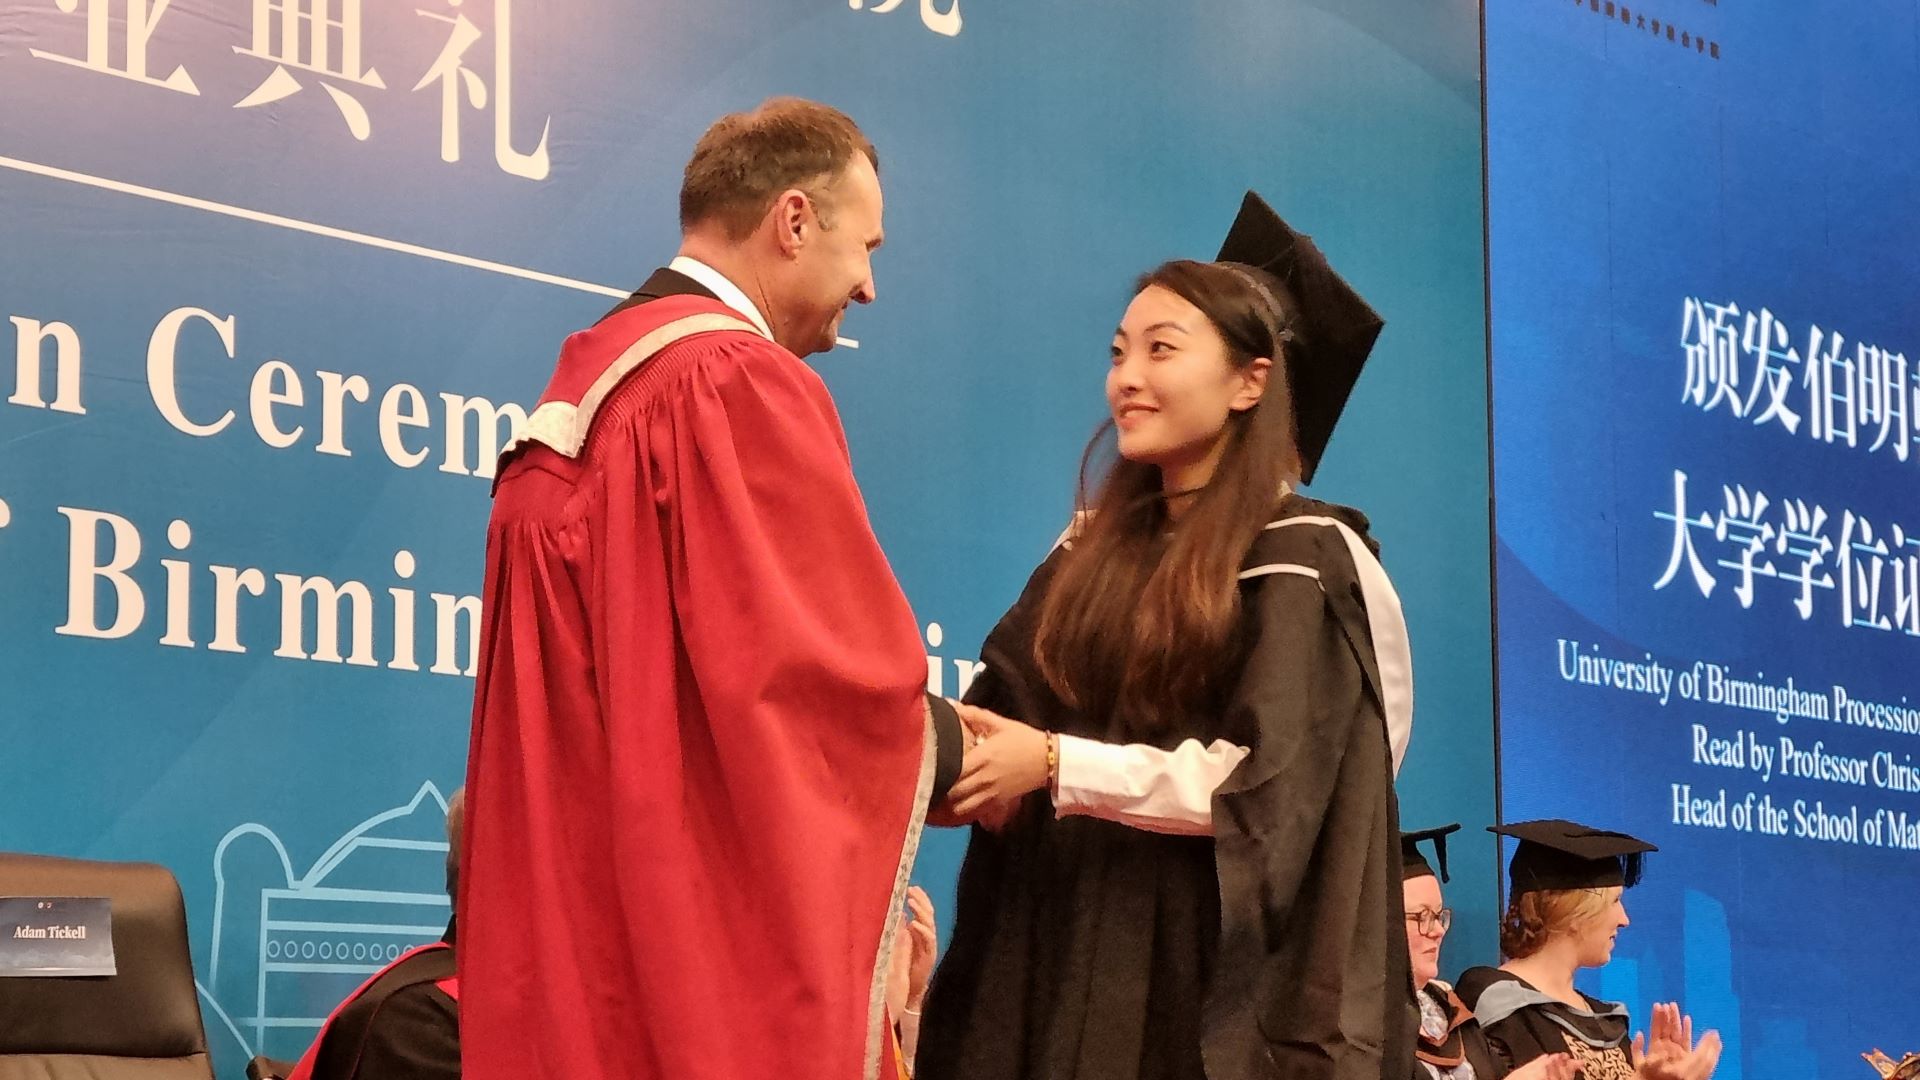 Vice-Chancellor presenting a graduating student with a degree